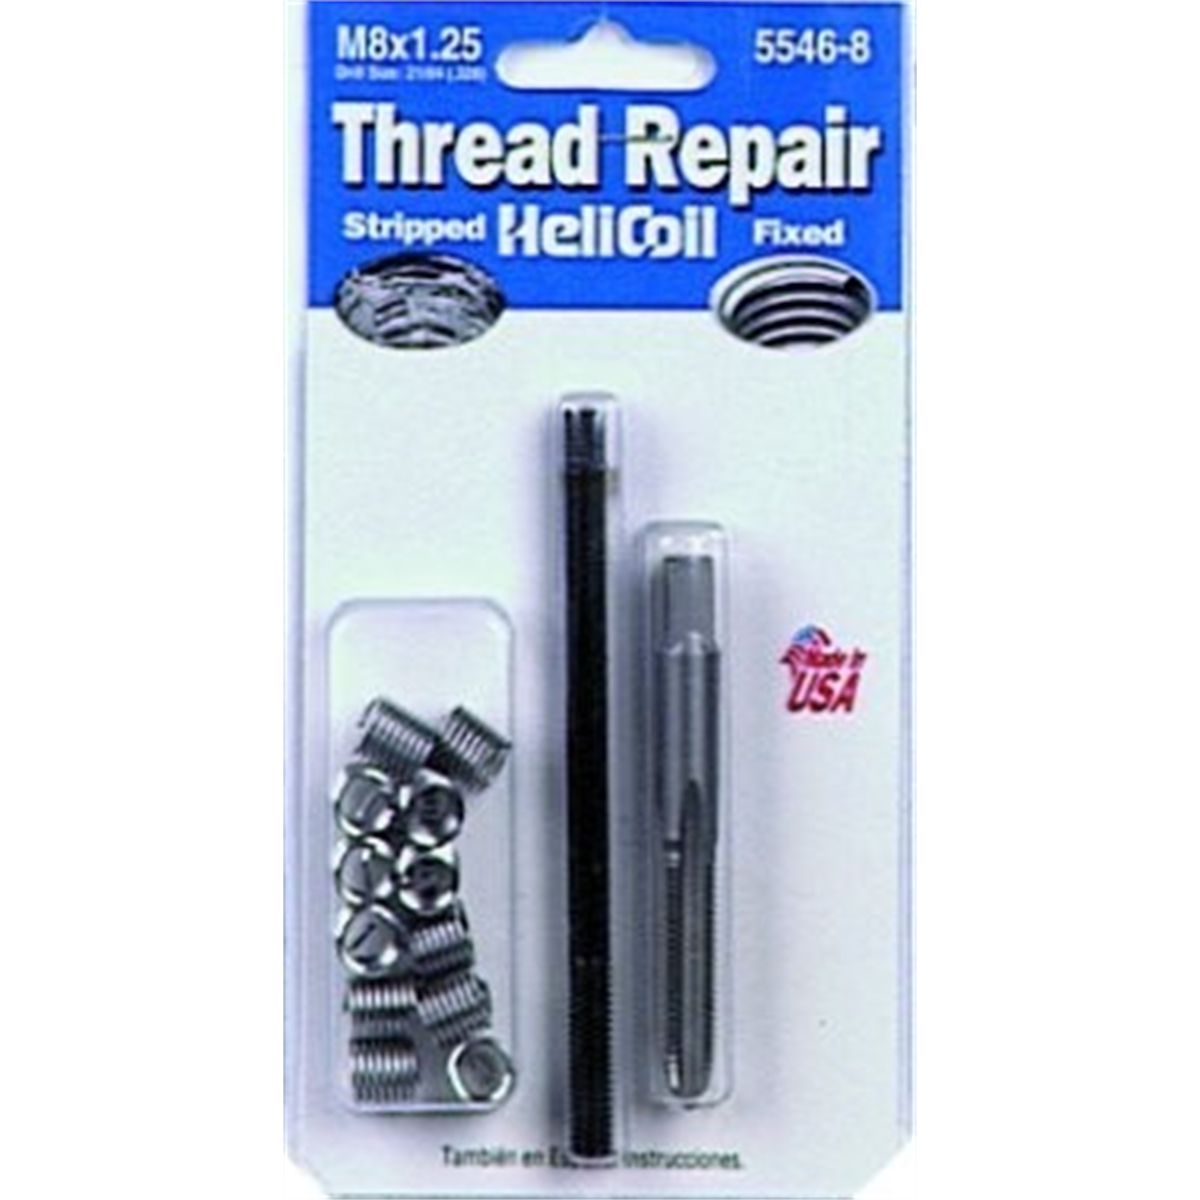 Select 2-56 to 3/4" 10 Helicoil Thread Repair Spiral Tap Drill 12 Inserts 